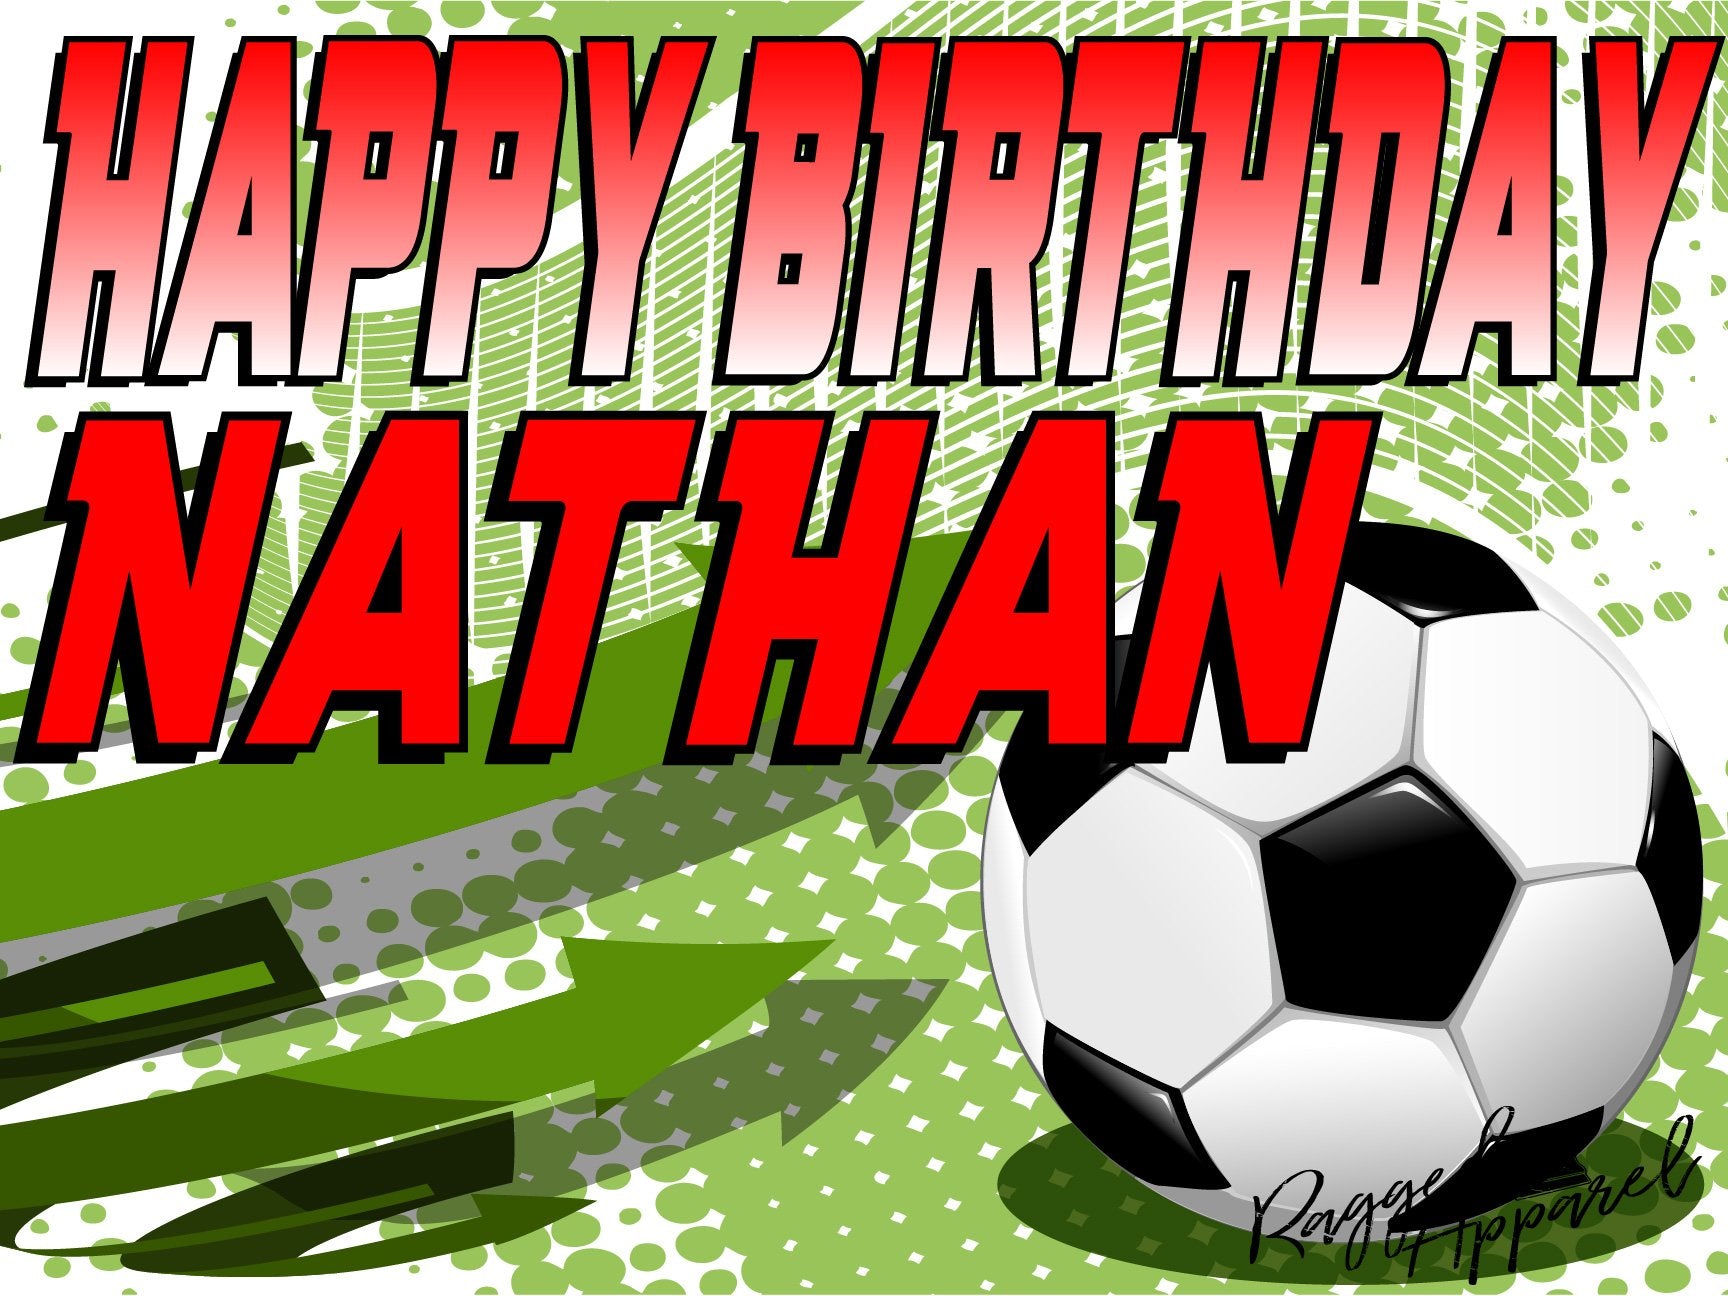 Kids Personalized Soccer Birthday Sign - Ragged Apparel Screen Printing and Signs - www.nmshirts.com